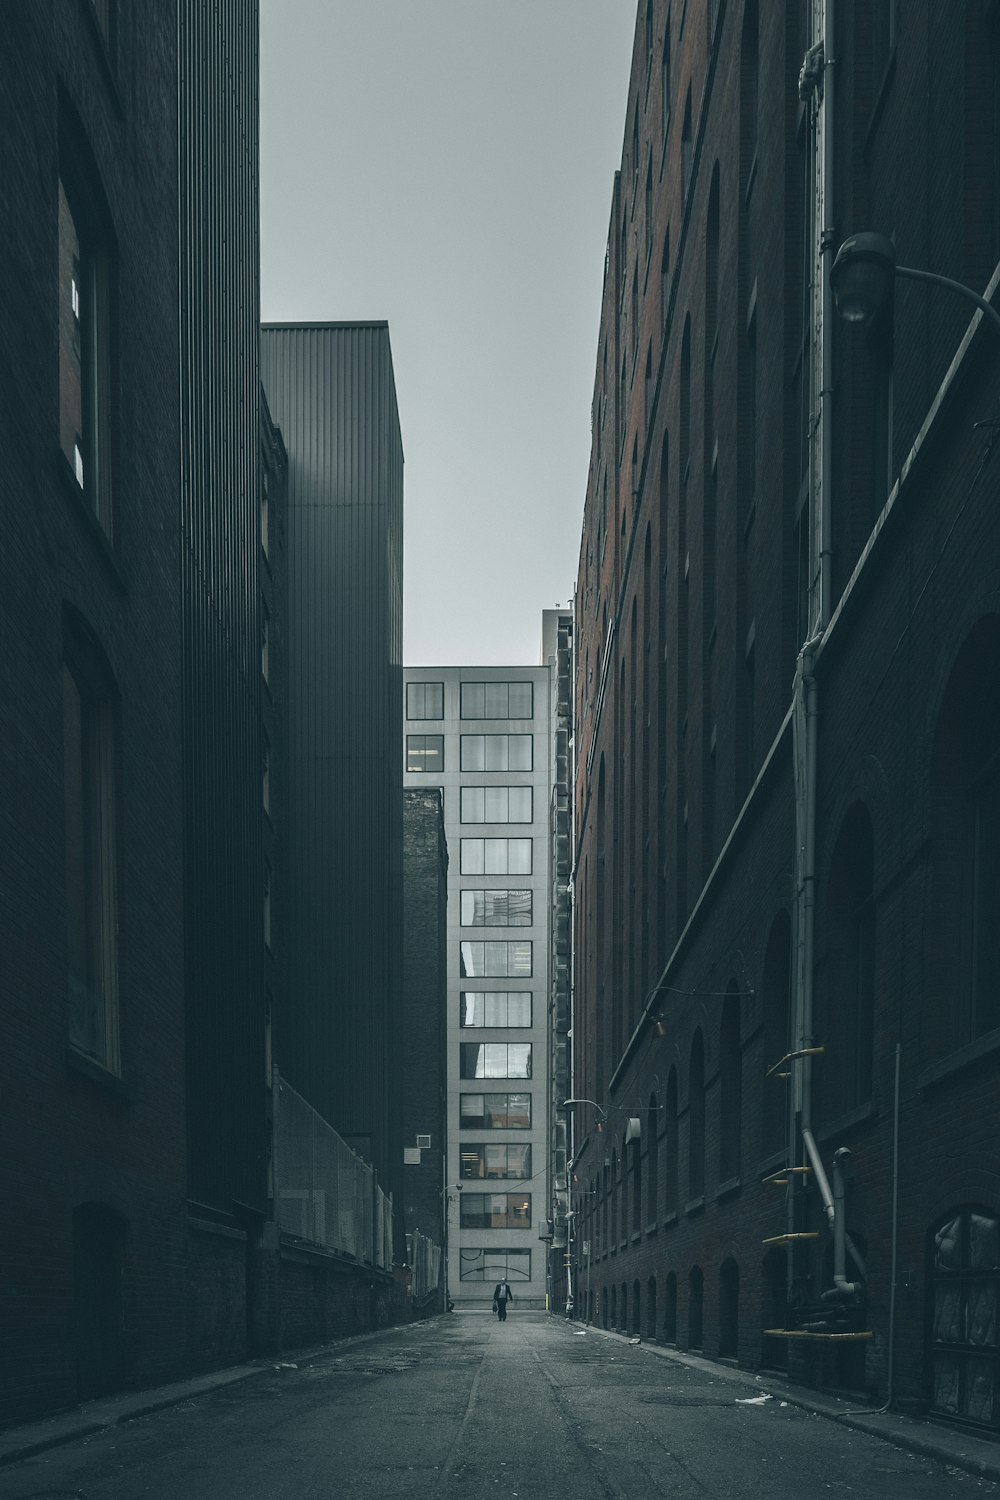 man walking in the middle of city buildings under gray clouds